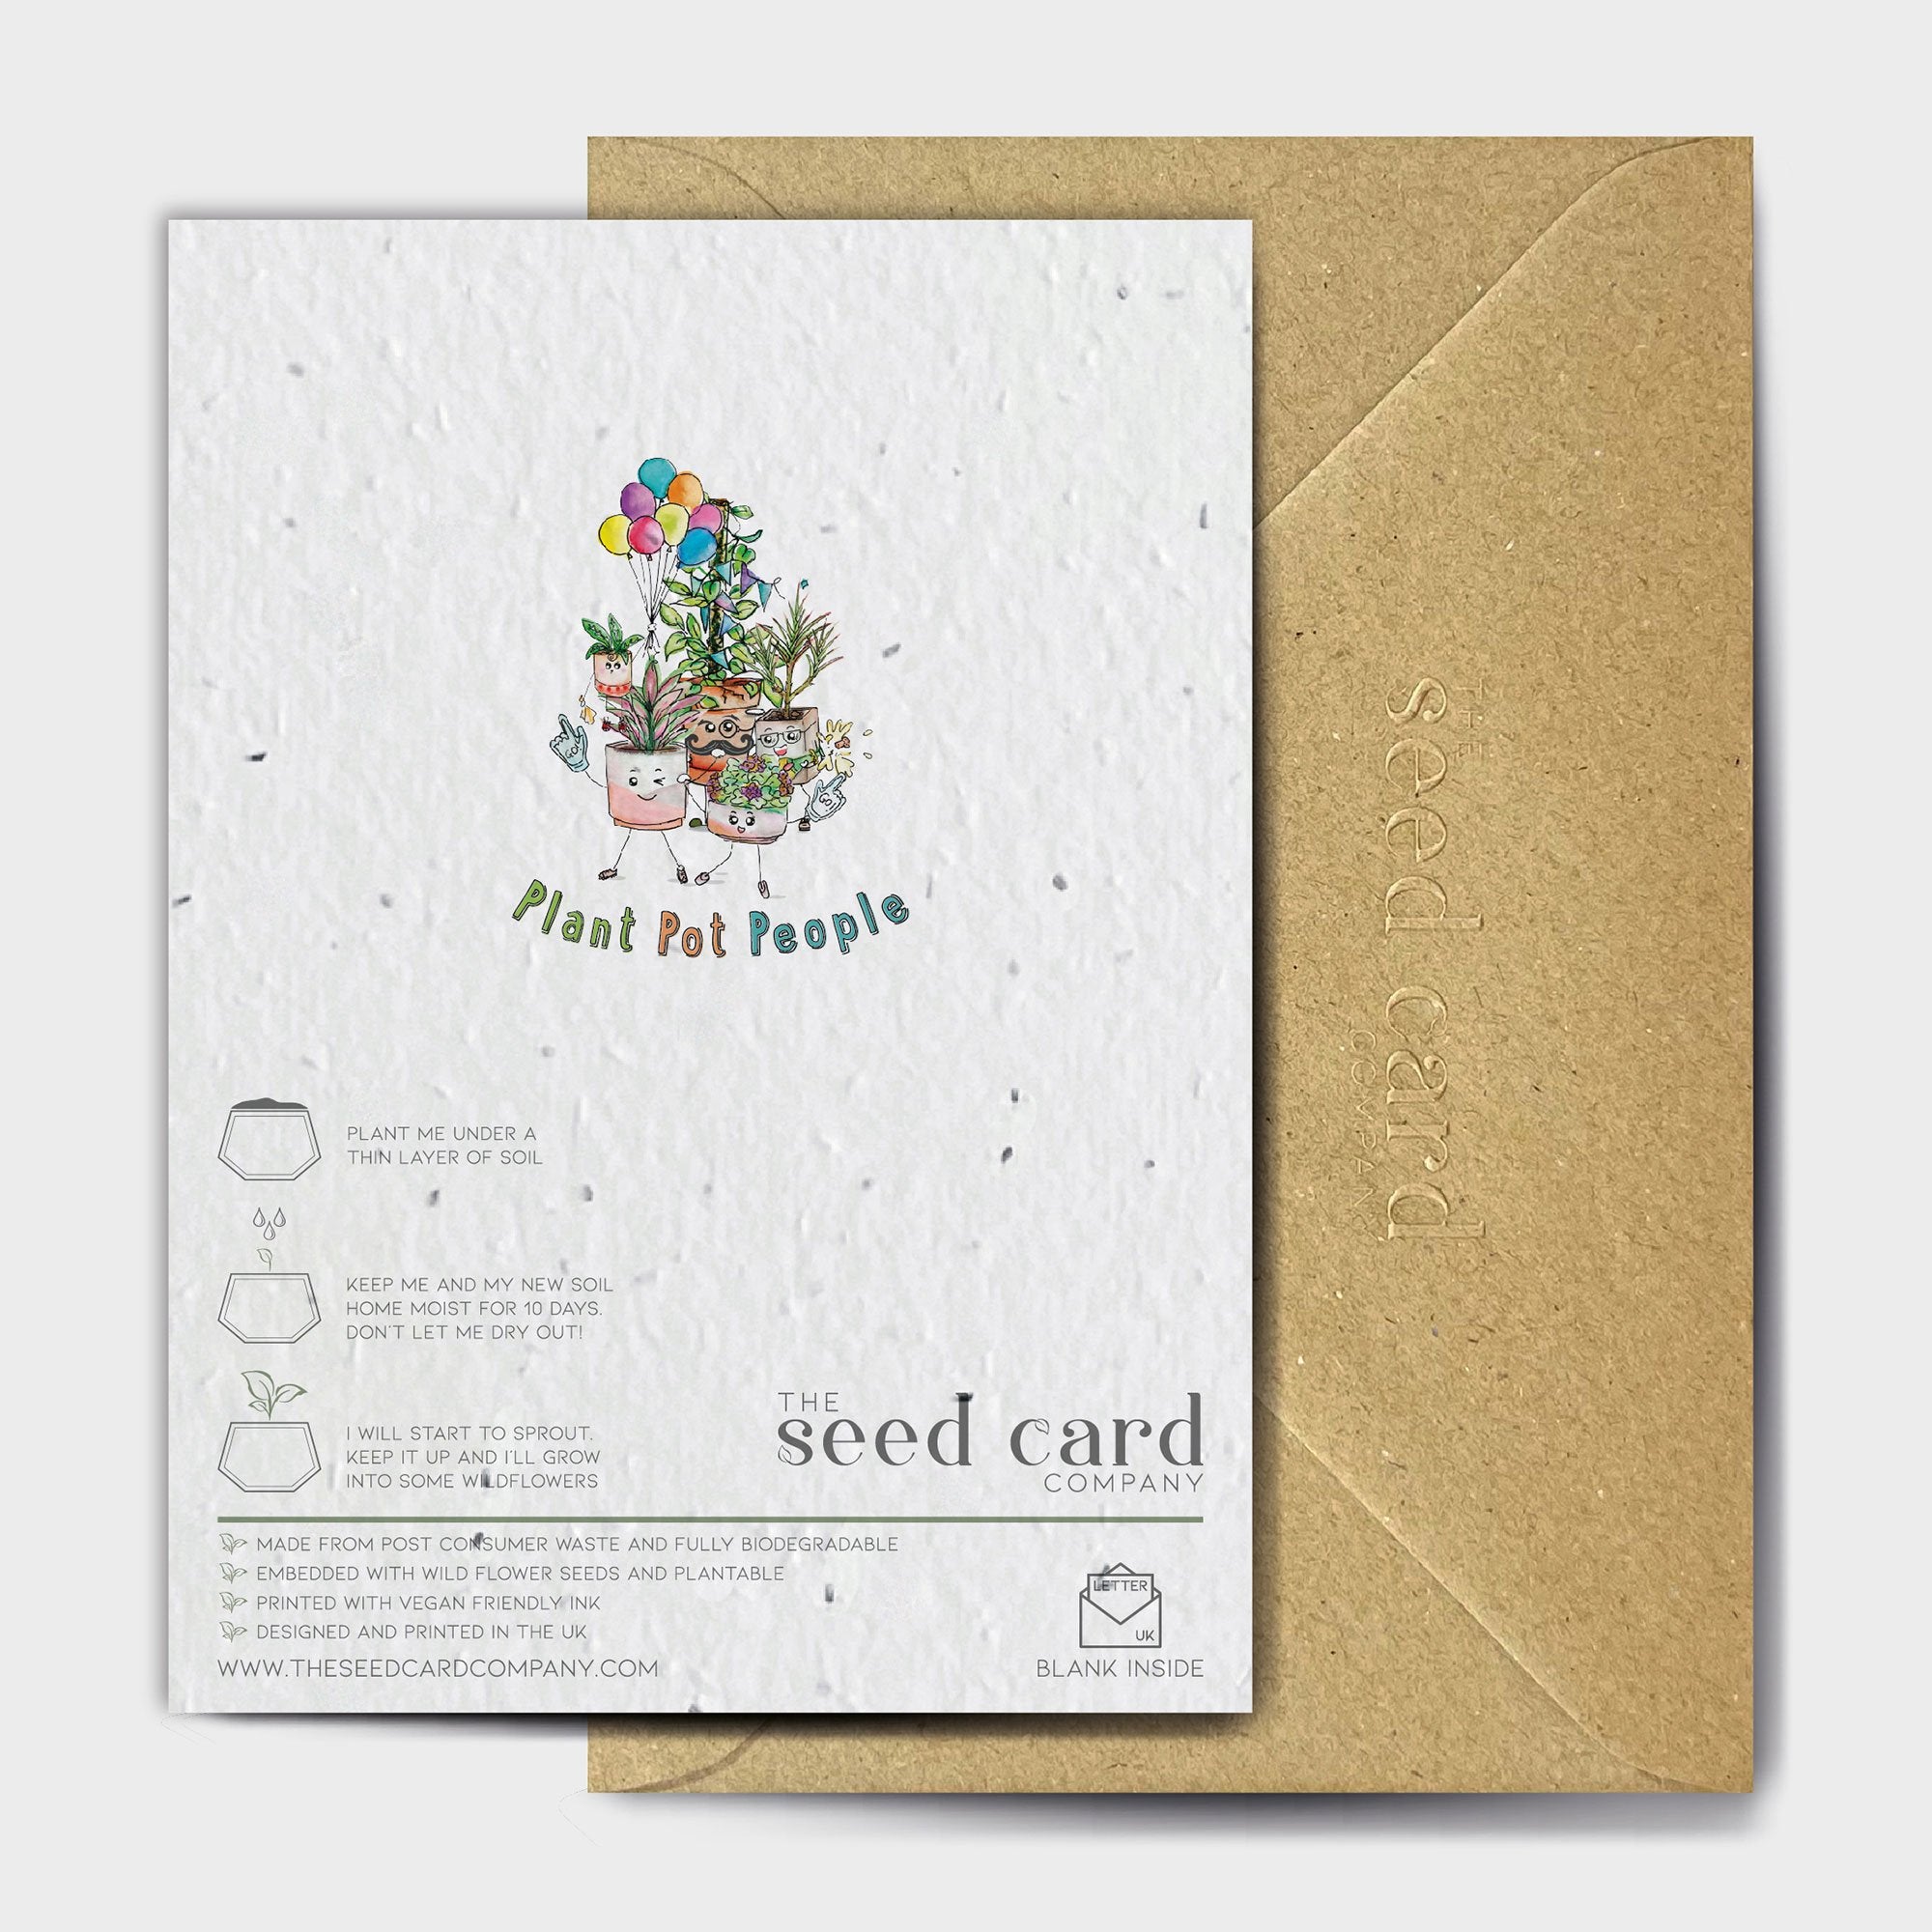 Shop online Sometimes We All Need A Good Water - 100% biodegradable seed-embedded cards Shop -The Seed Card Company